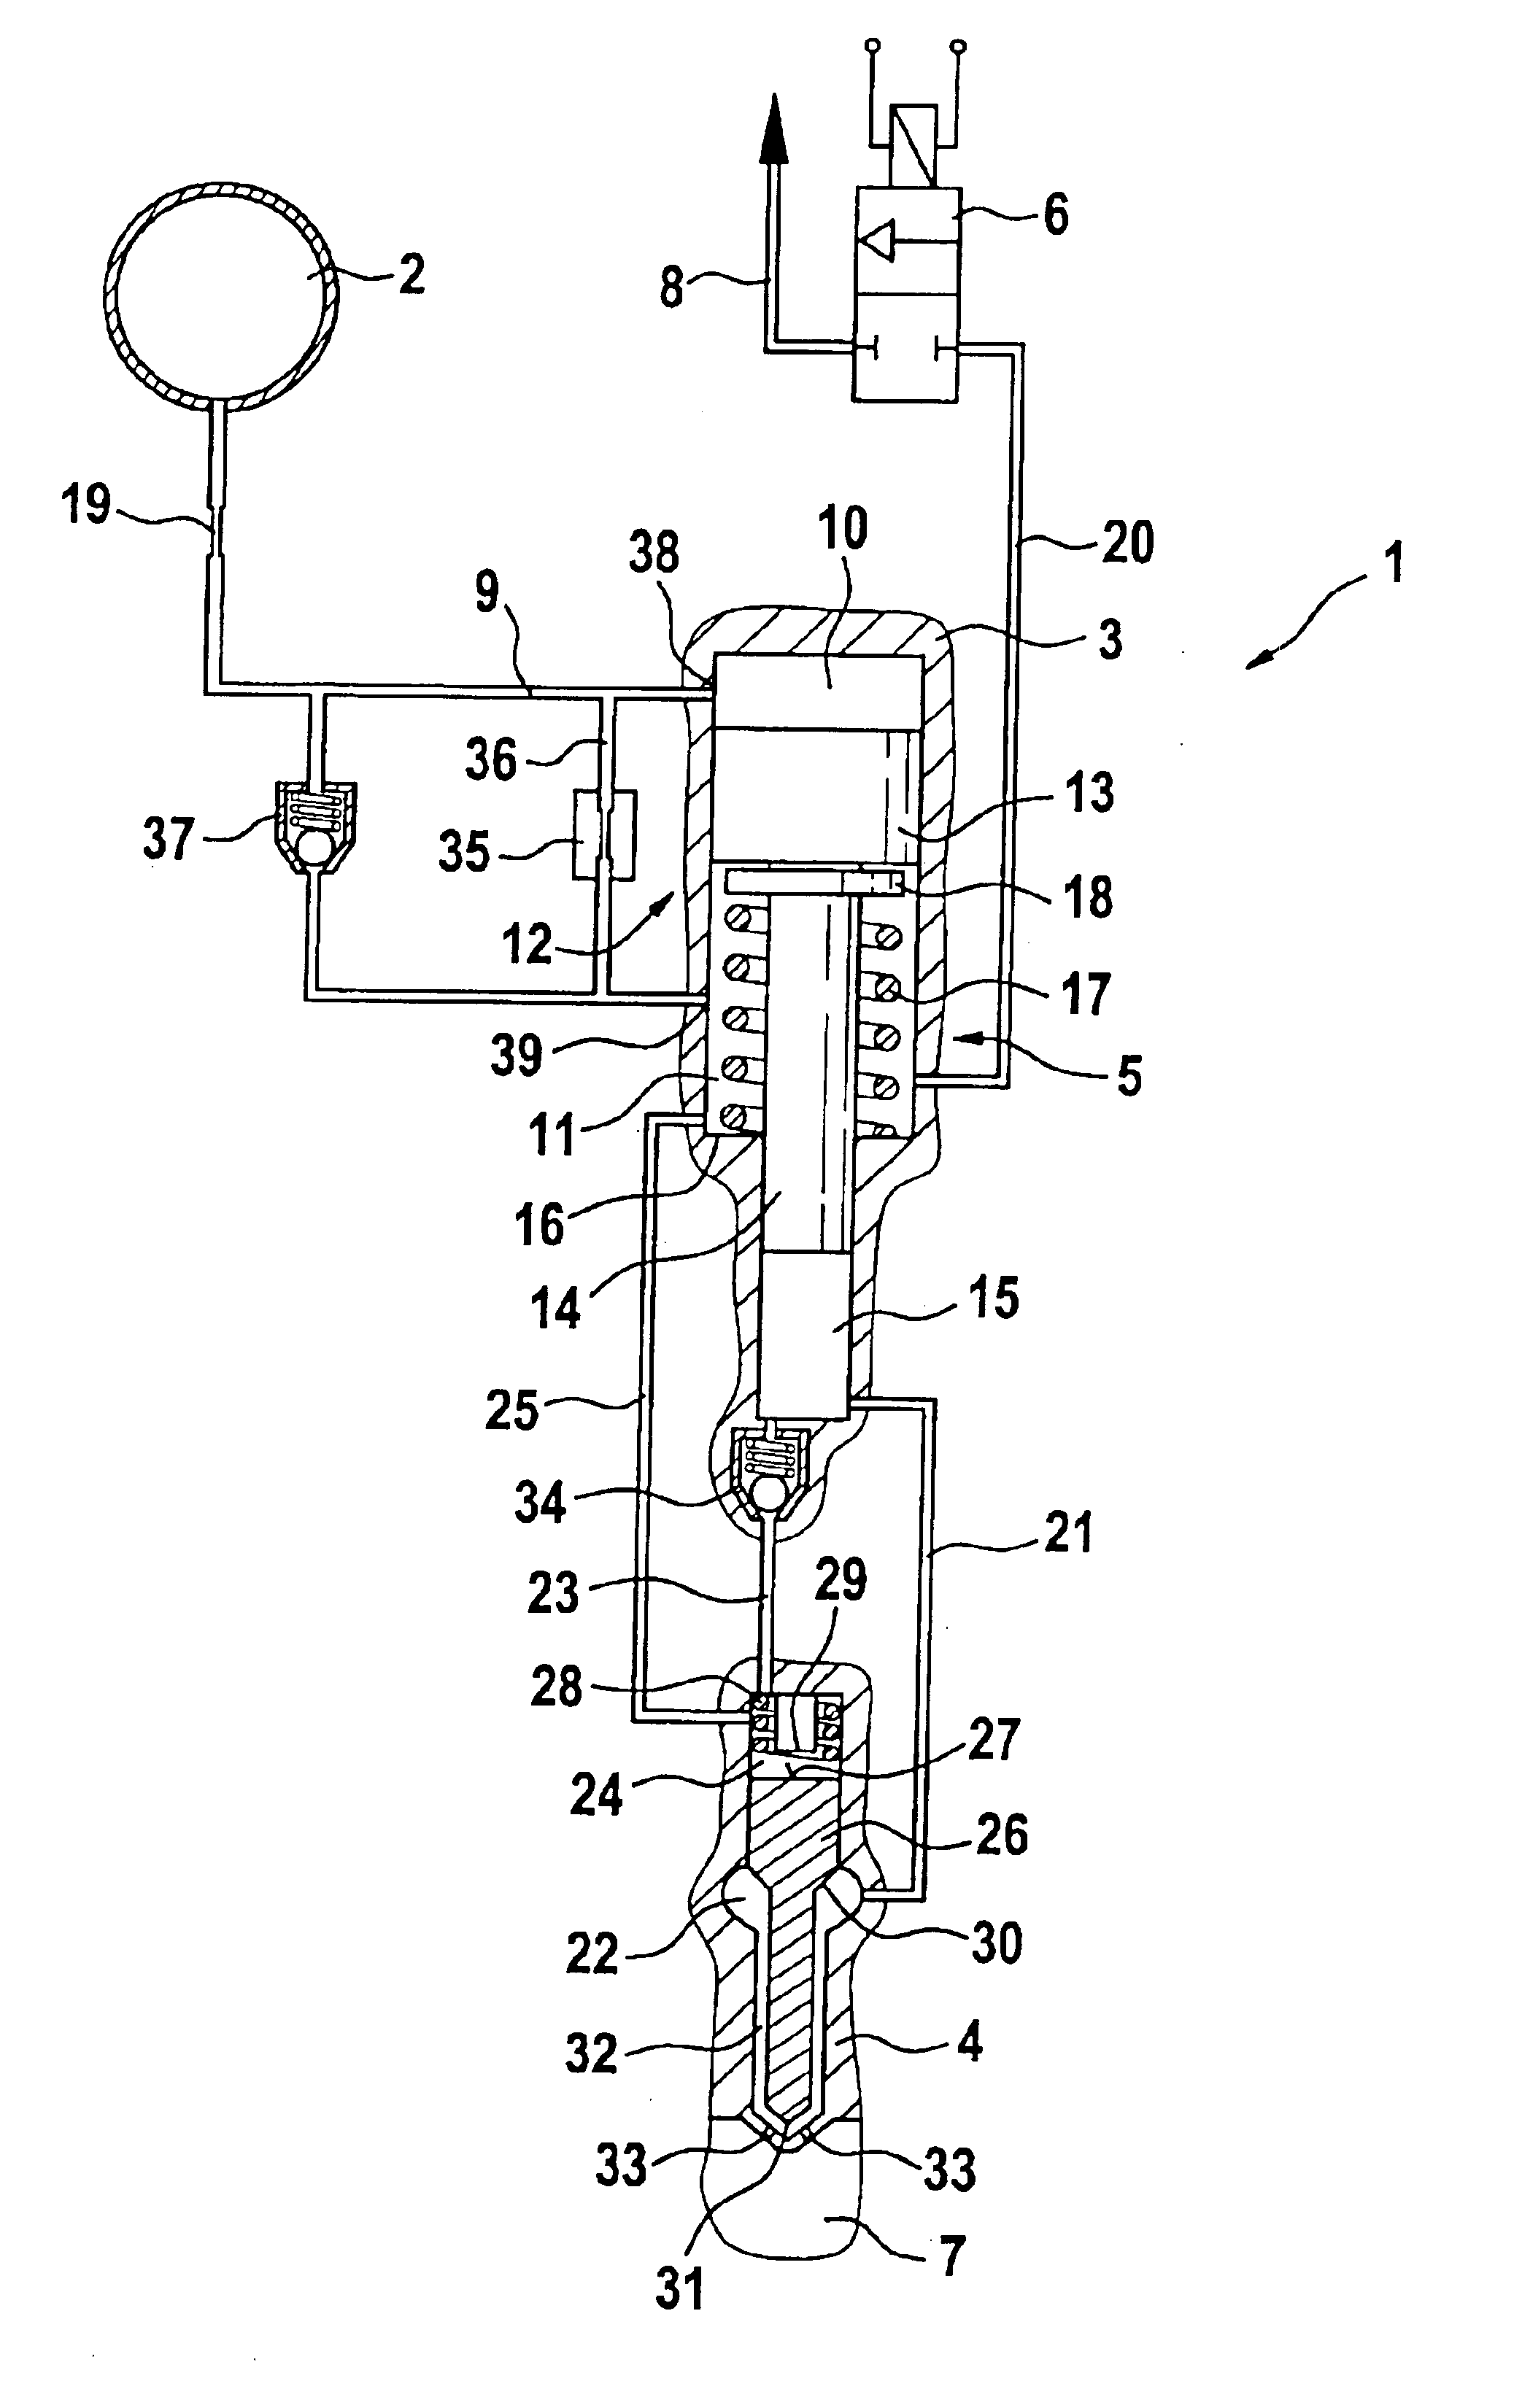 Boosted fuel injector with rapid pressure reduction at end of injection